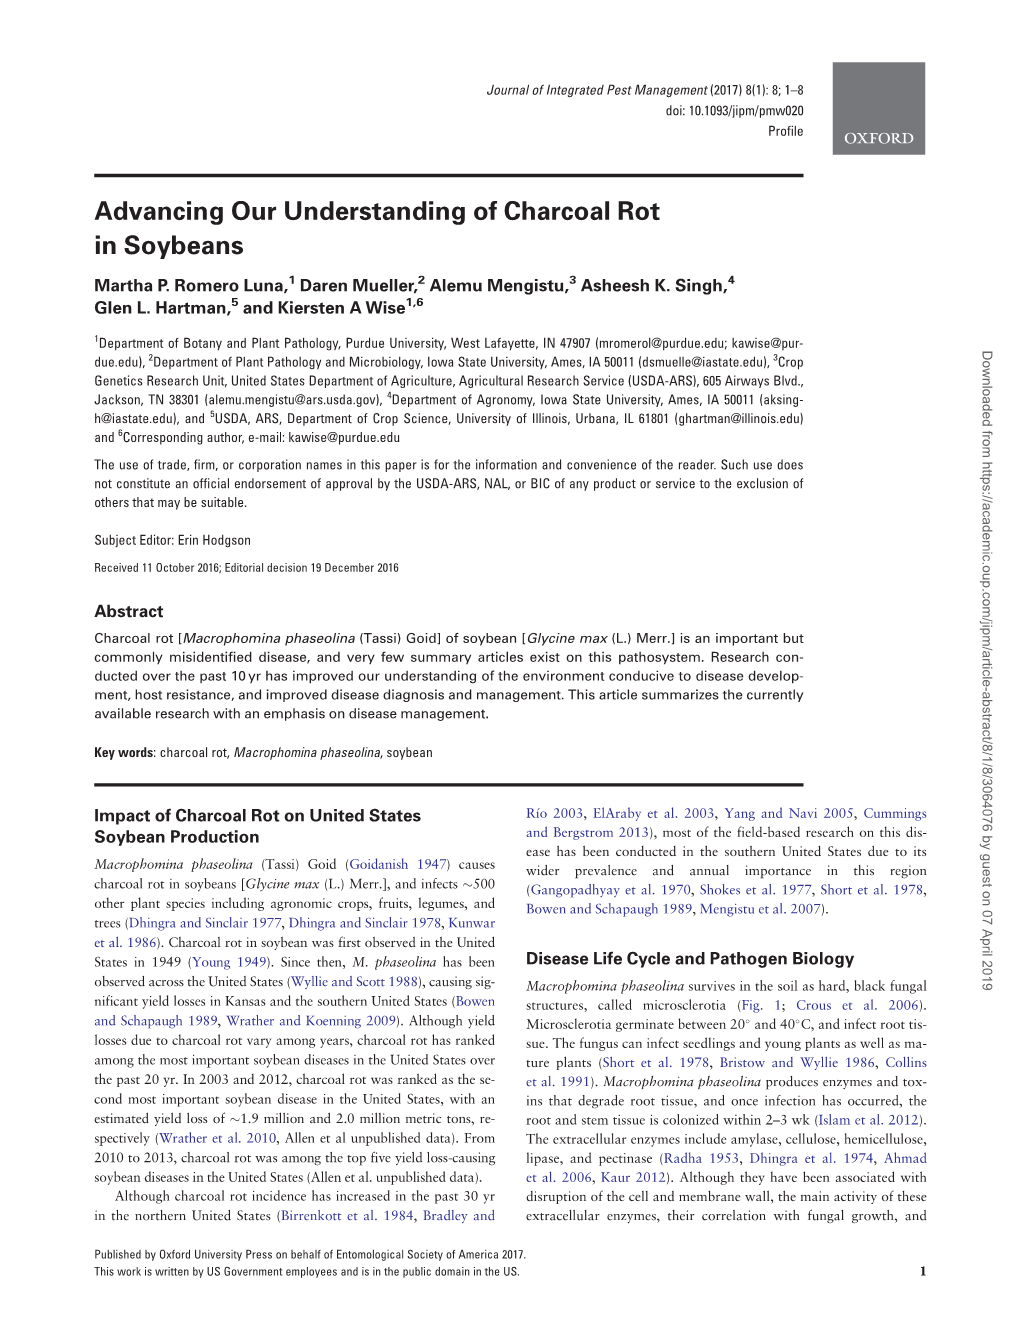 Advancing Our Understanding of Charcoal Rot in Soybeans